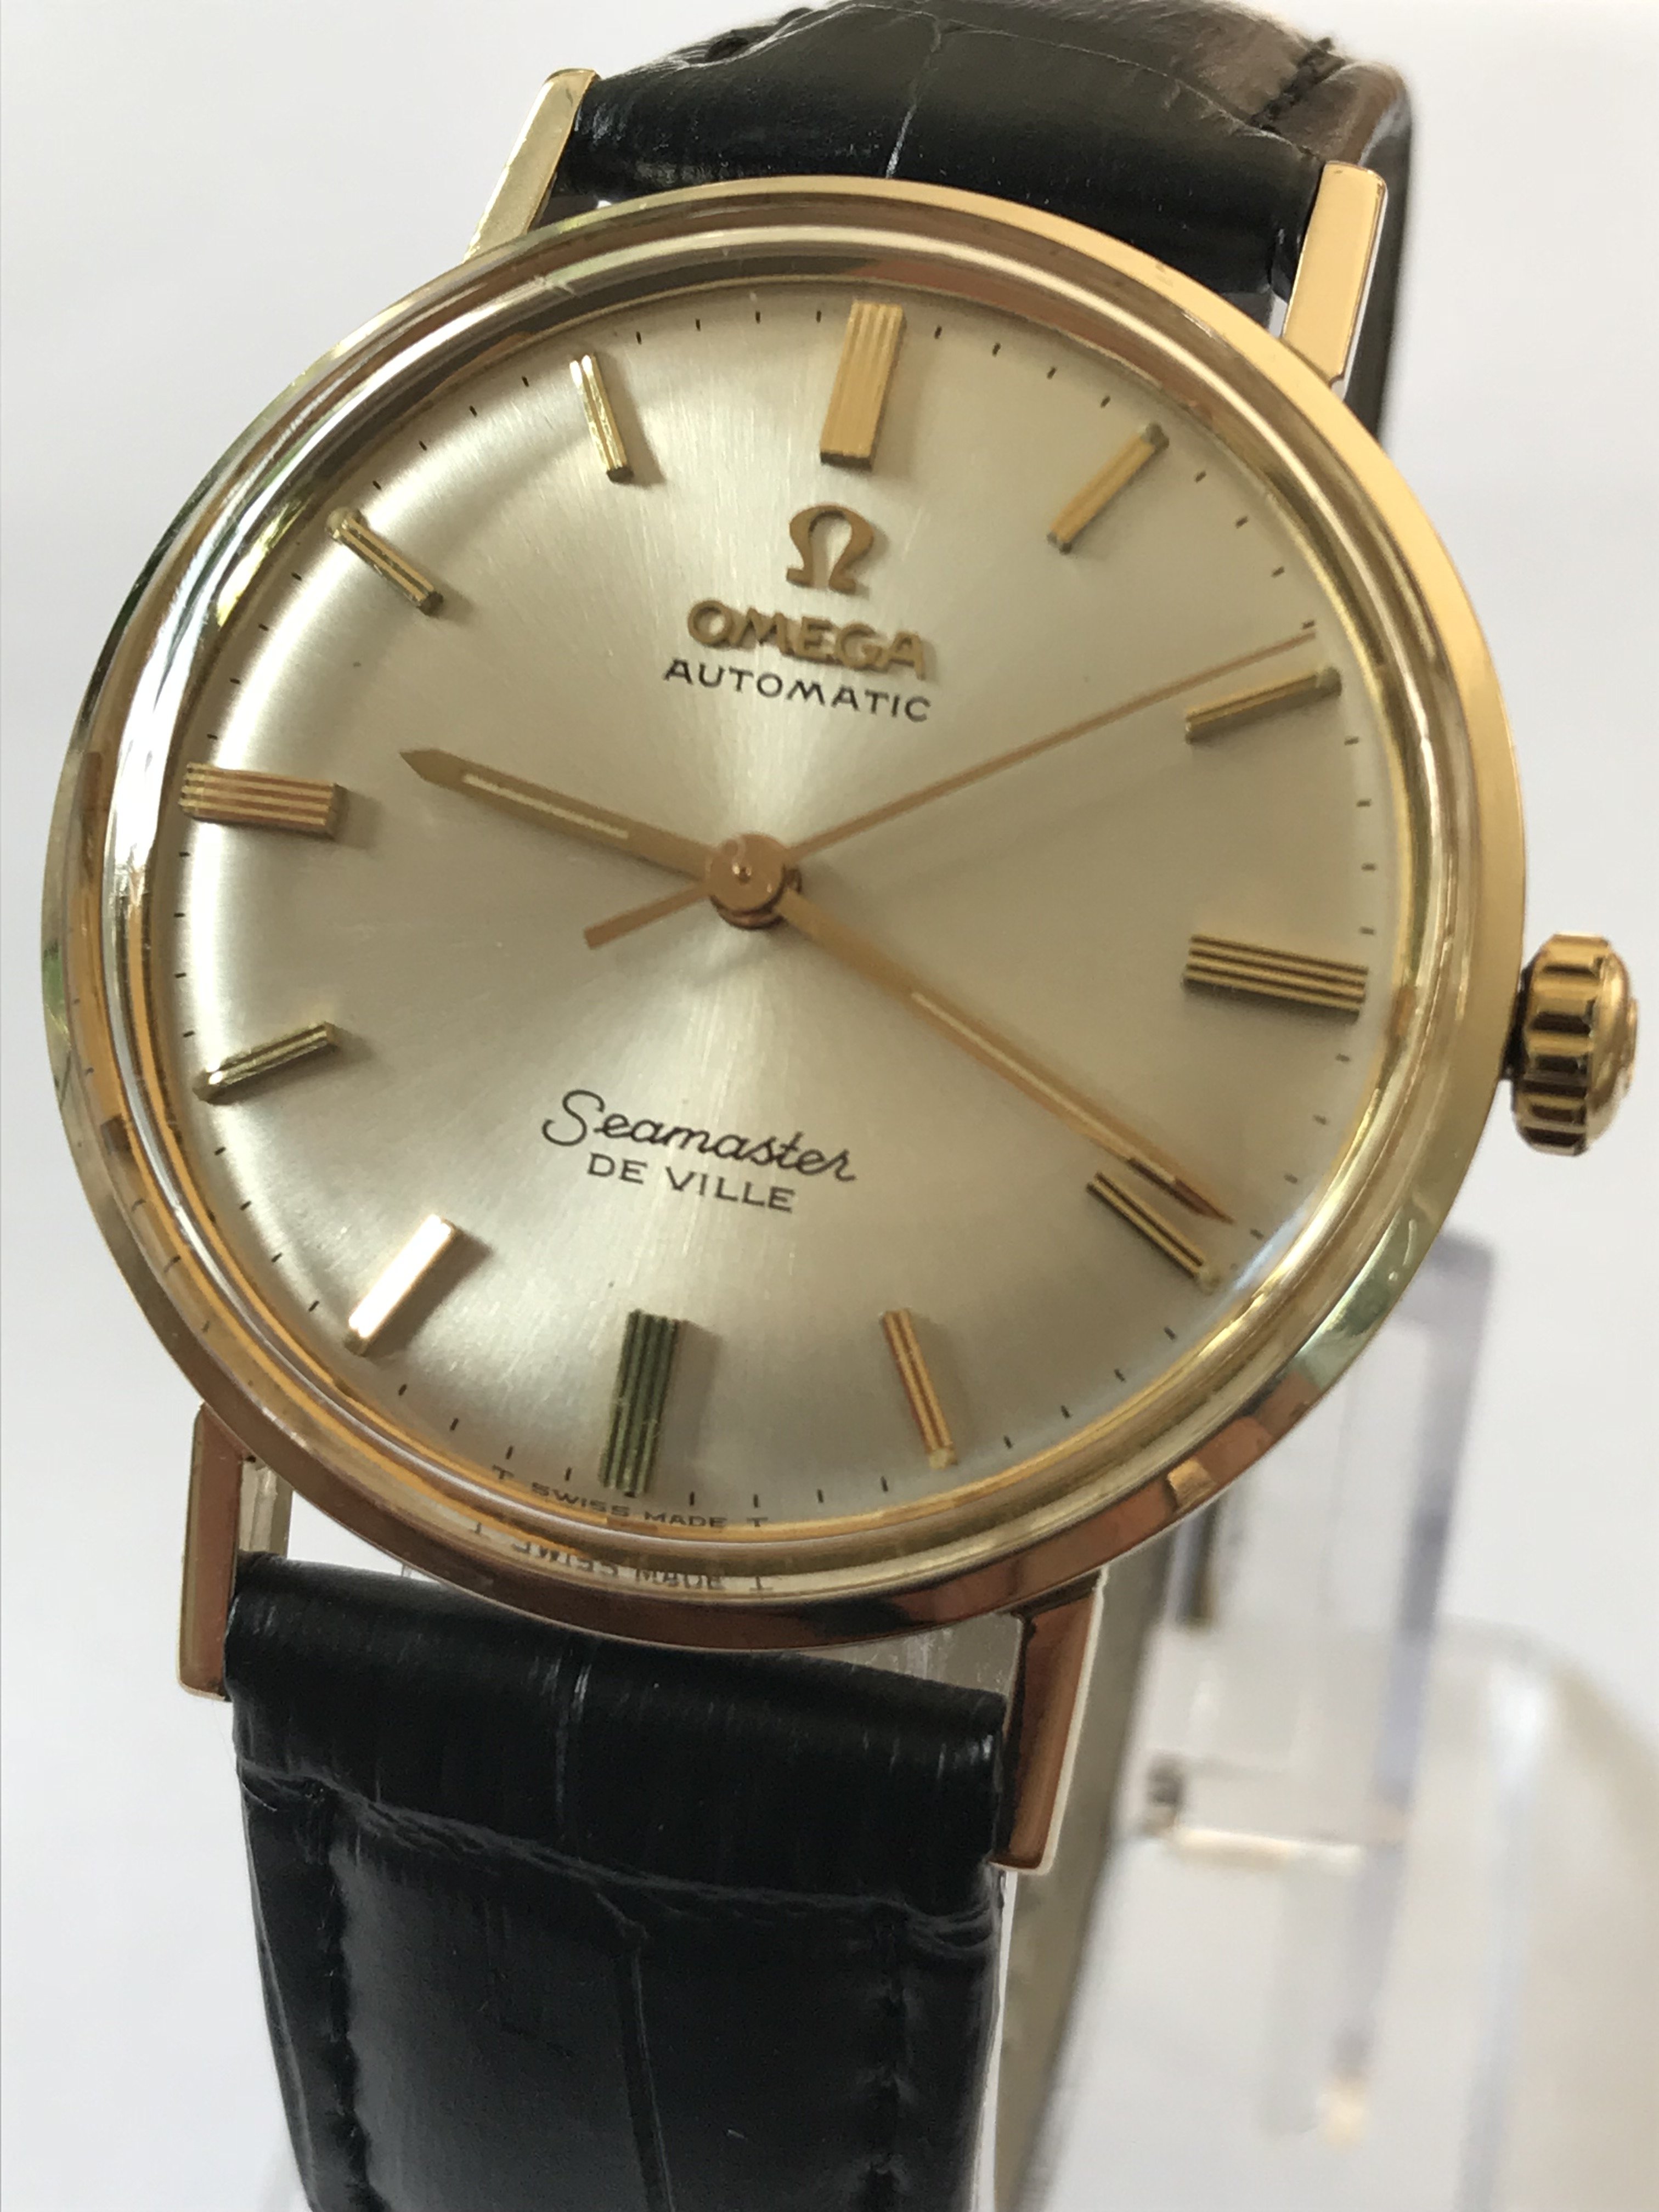 Sold Rare Vintage Omega Seamaster Deville Automatic Gold Watch Very Good Condition Omega Forums